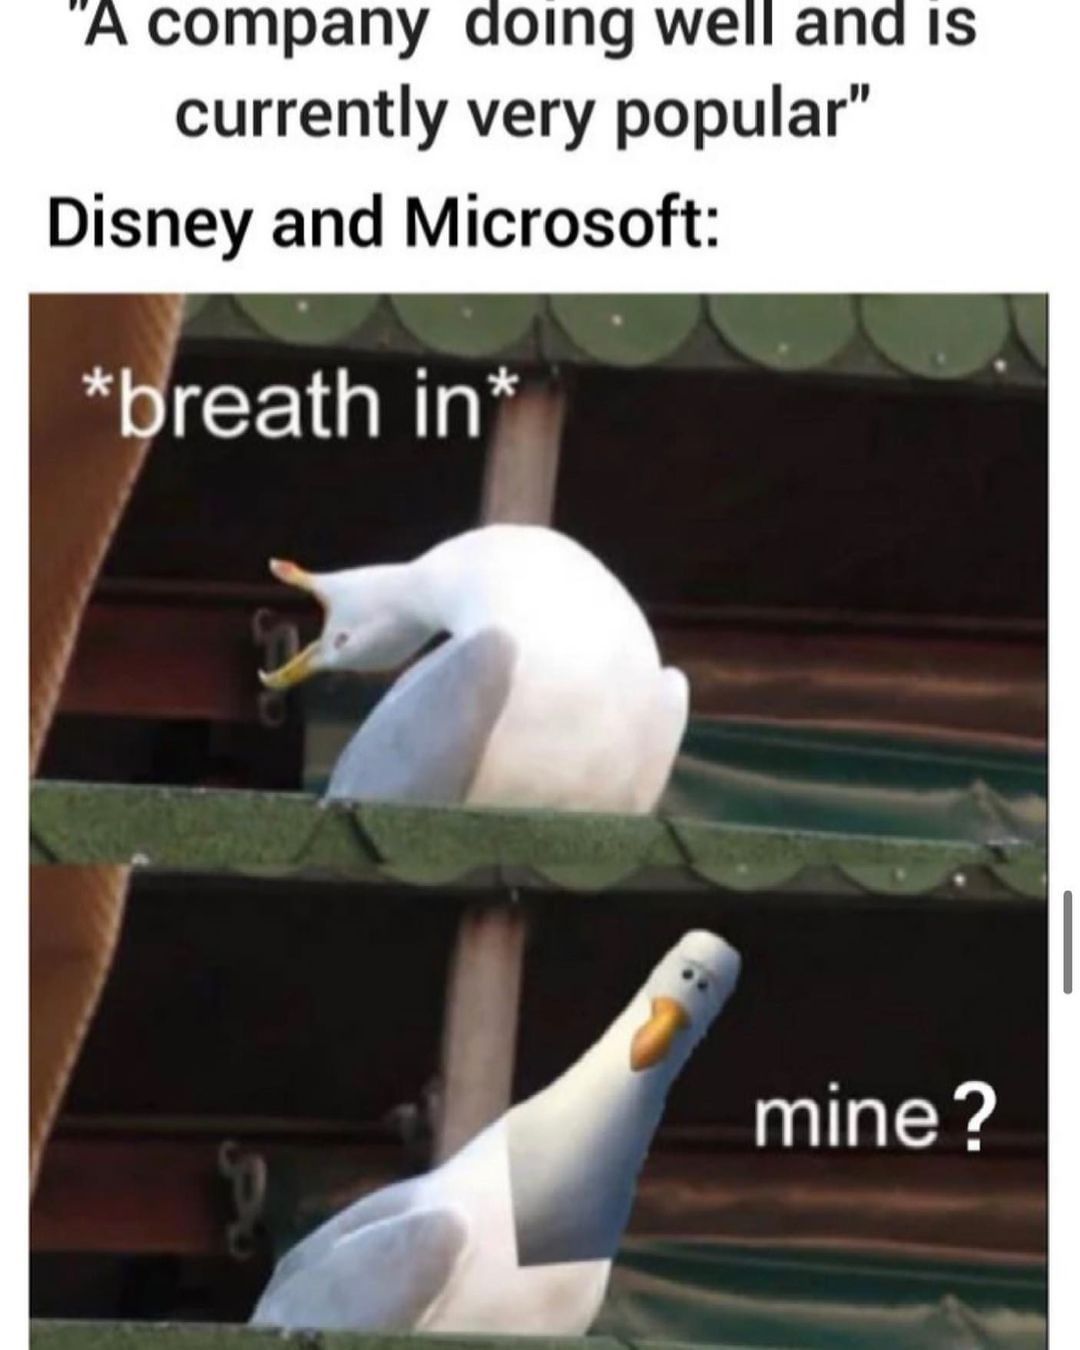 A company doing well and is currently very popular. Disney and Microsoft: Breath, mine?